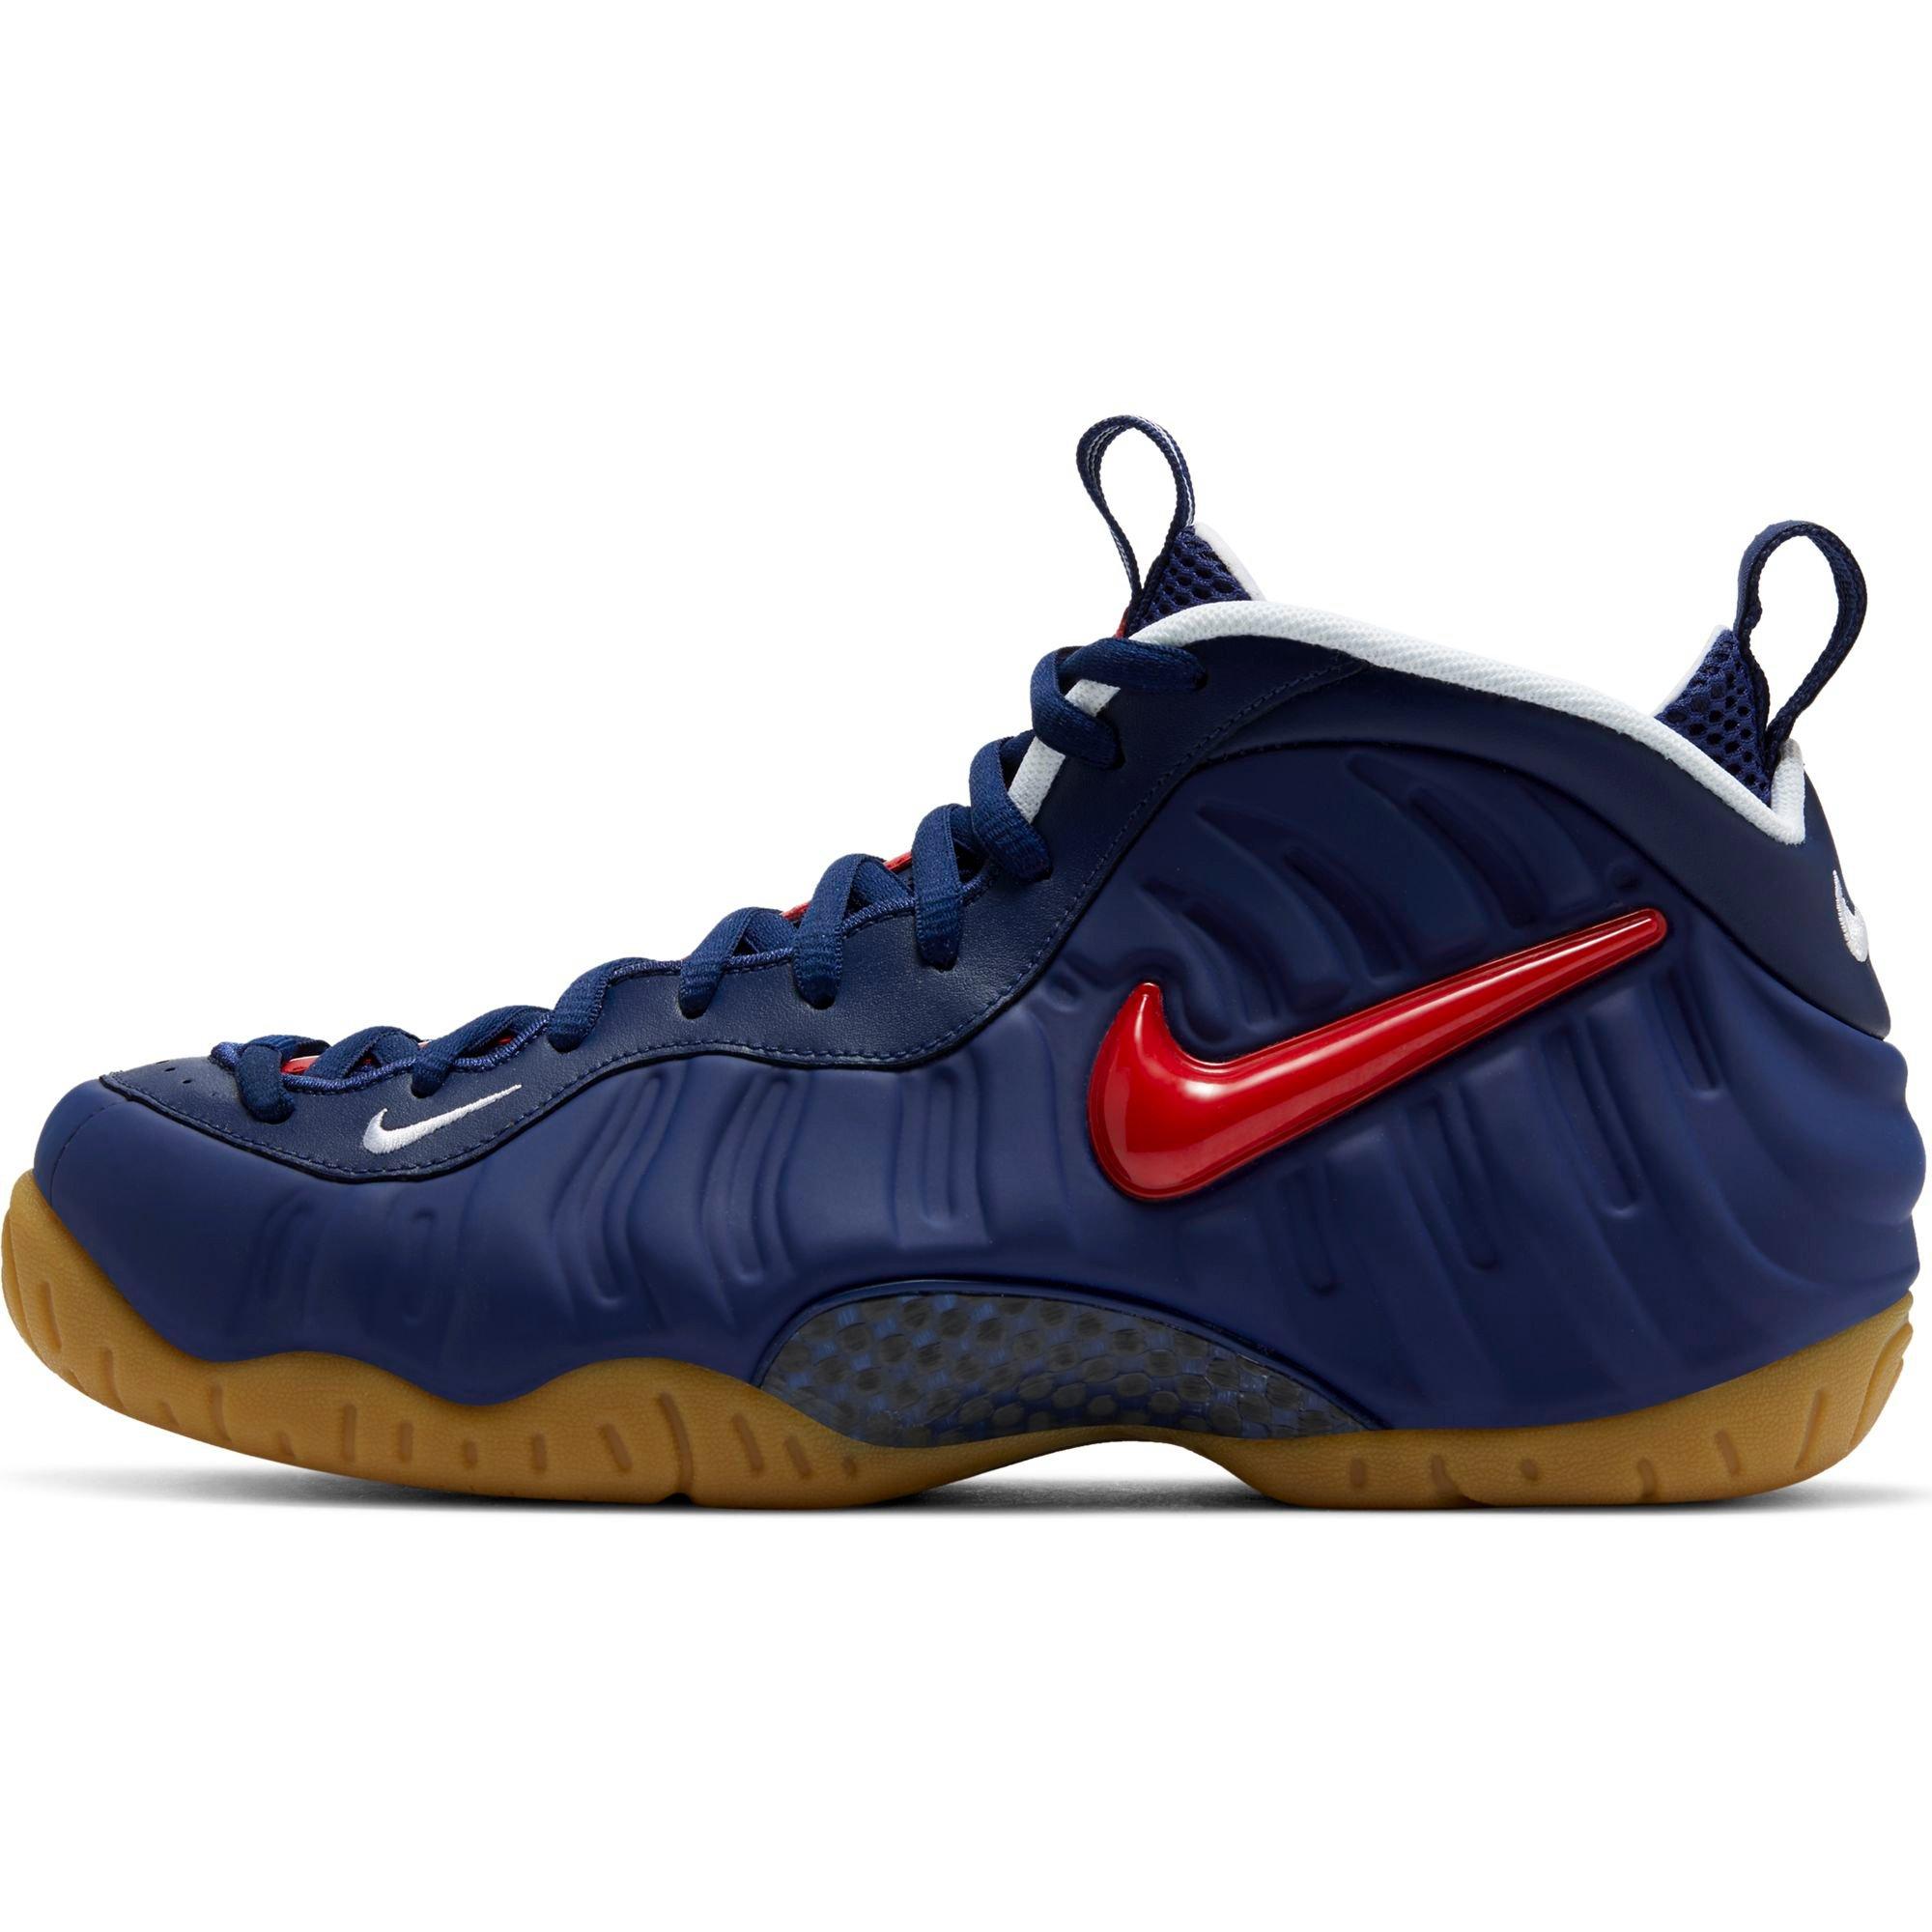 blue and red foamposites 2020